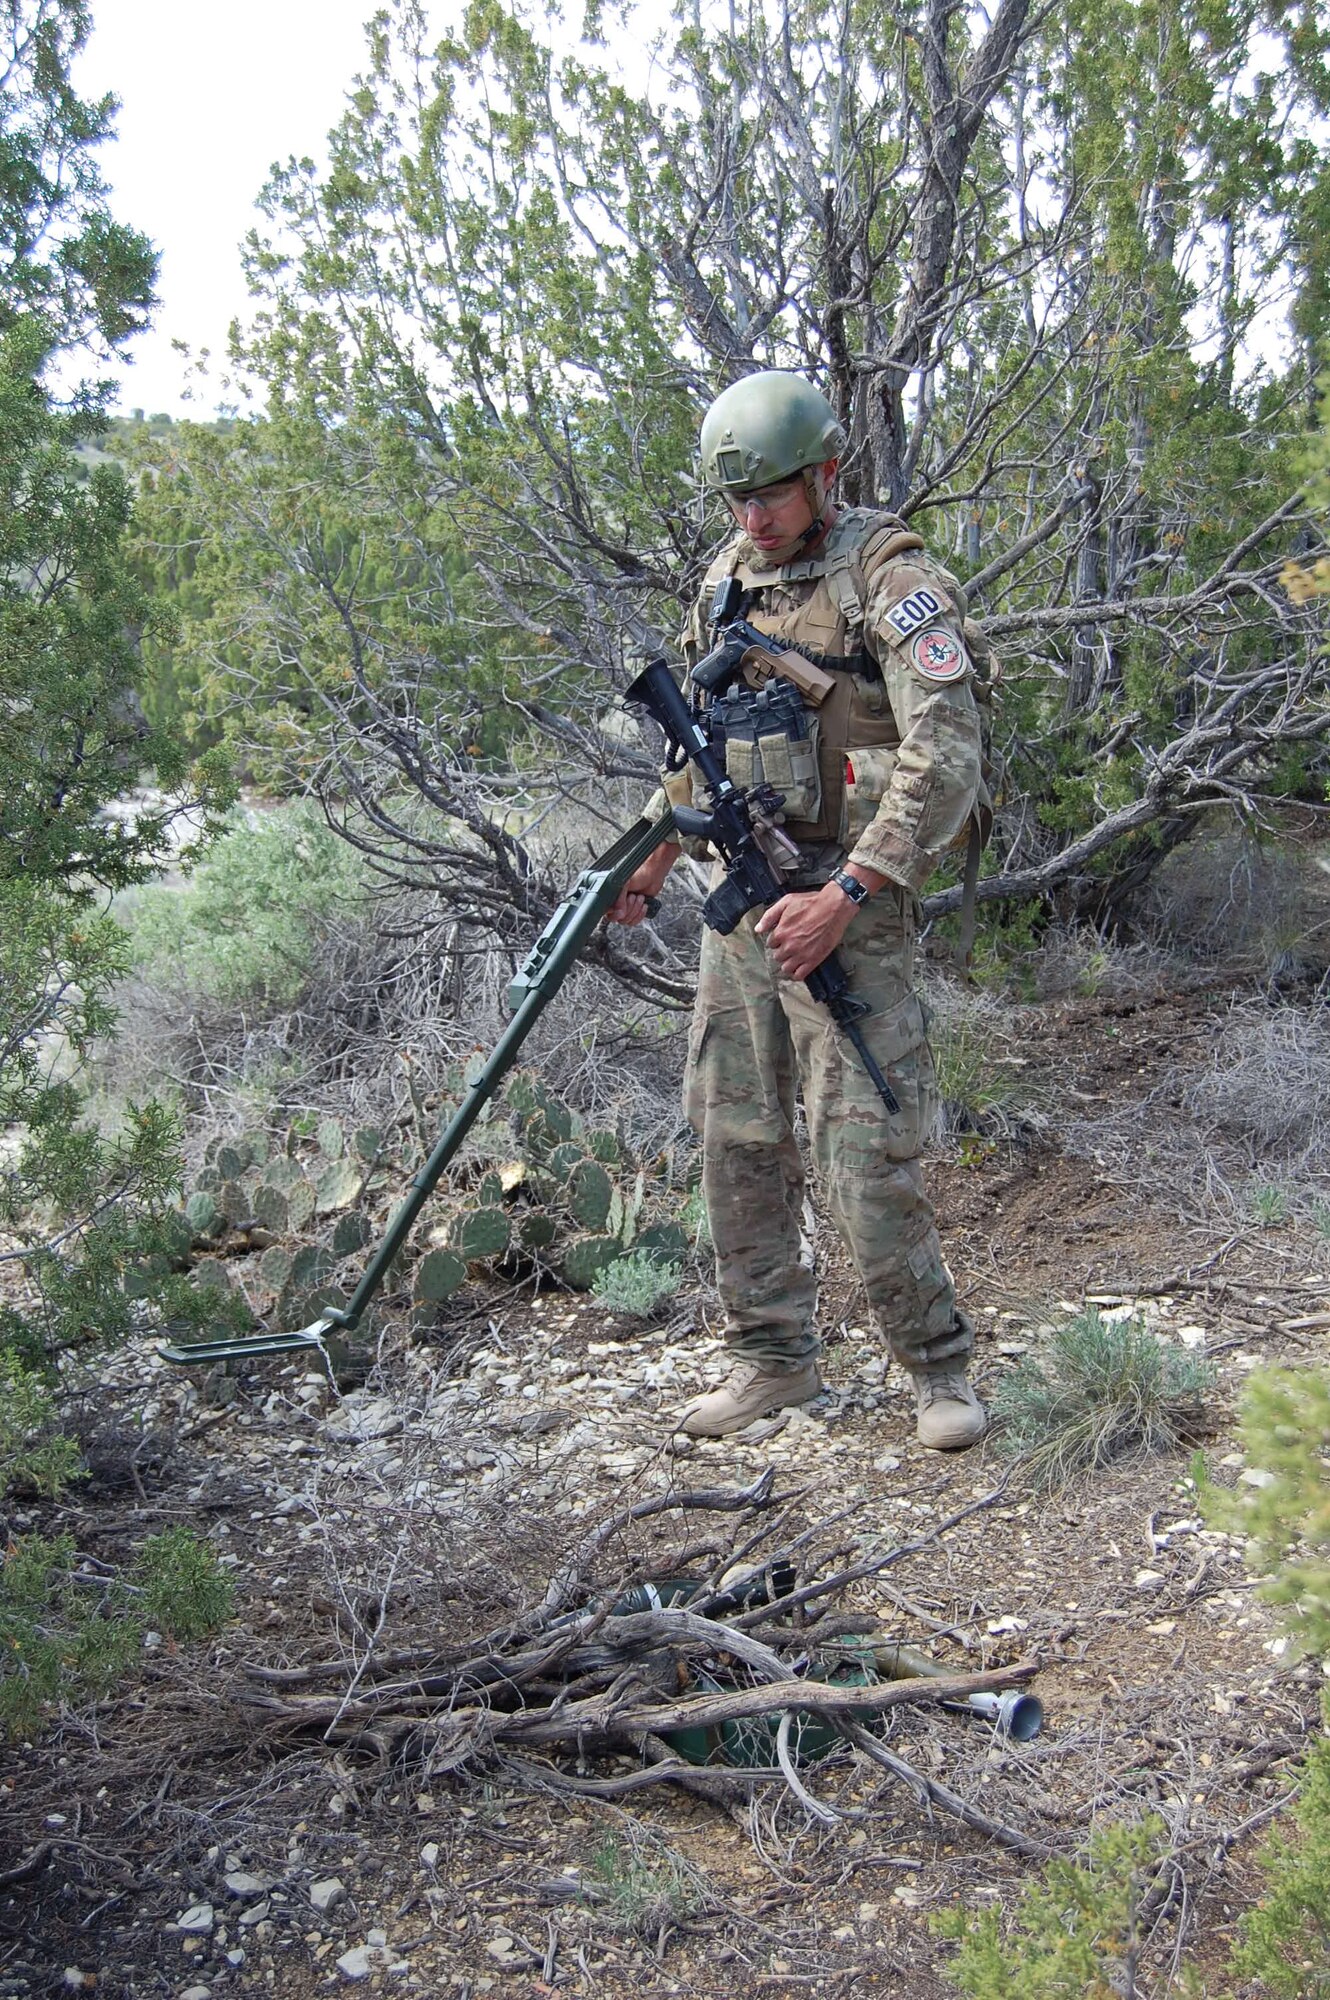 Soldiers practice using sniper skills to dispose of explosives